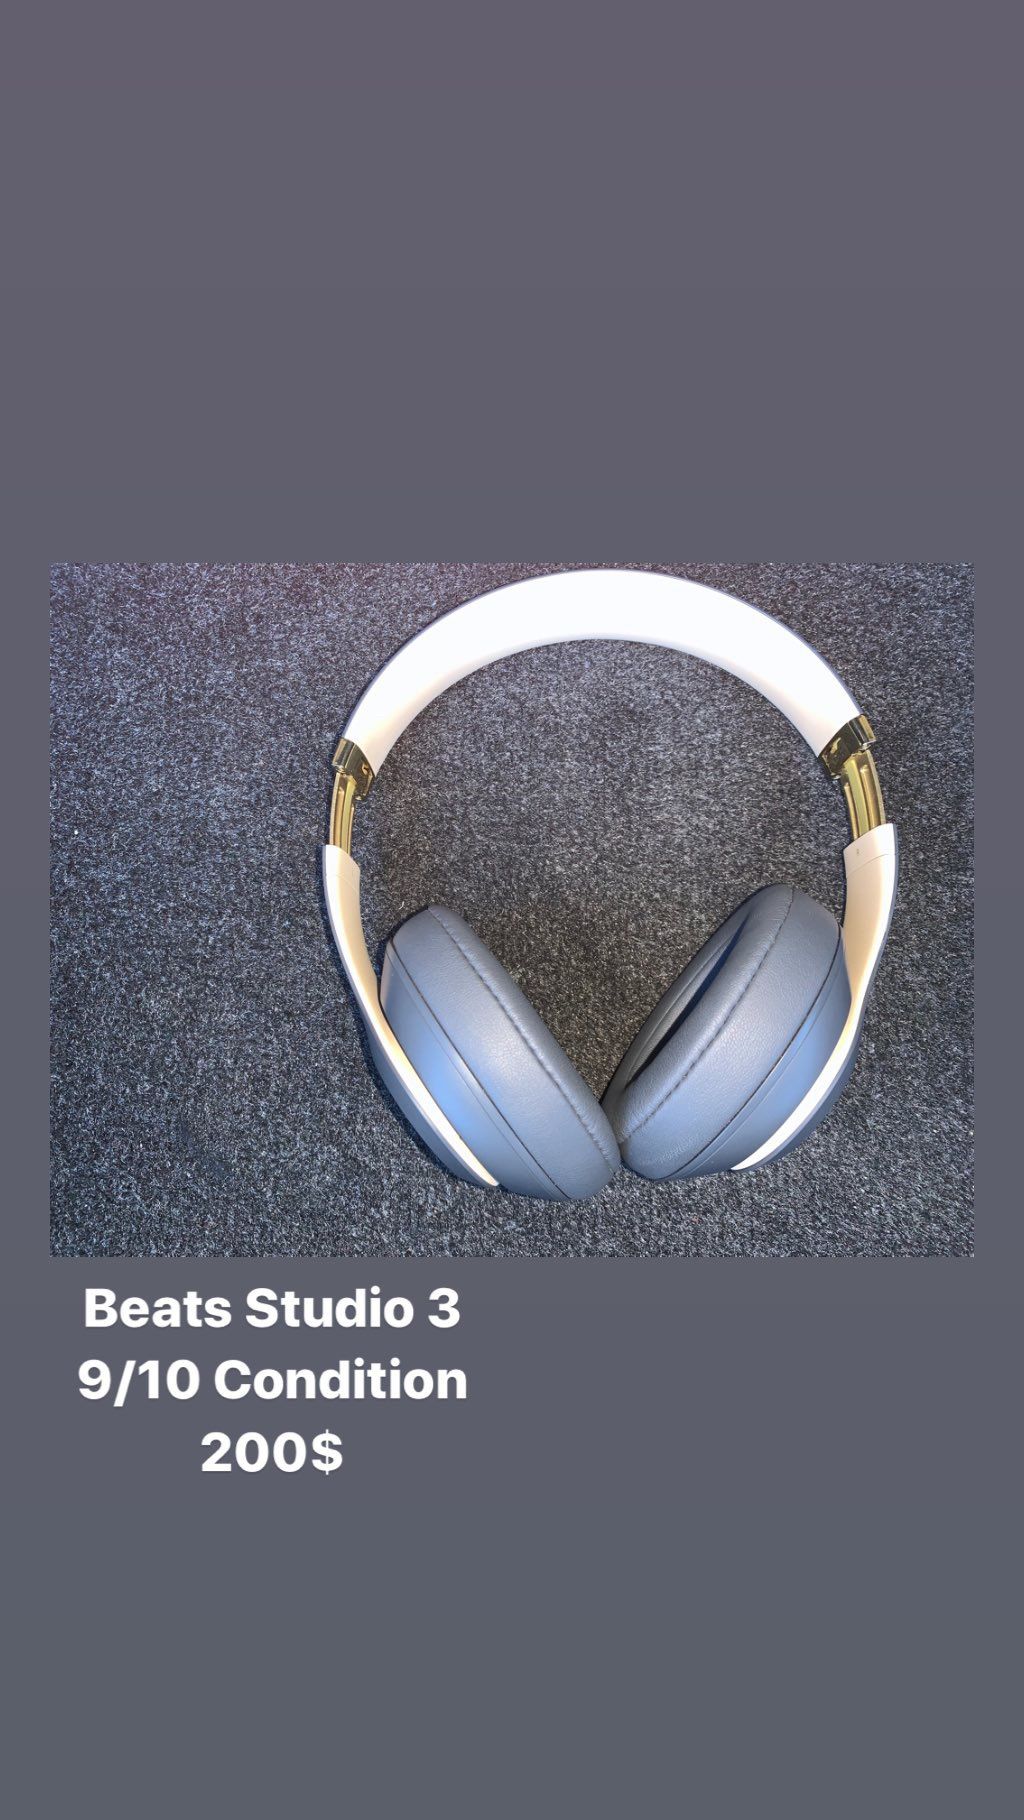 Beats Studio 3 Noise Canceling 9/10 almost 10/10 condition.